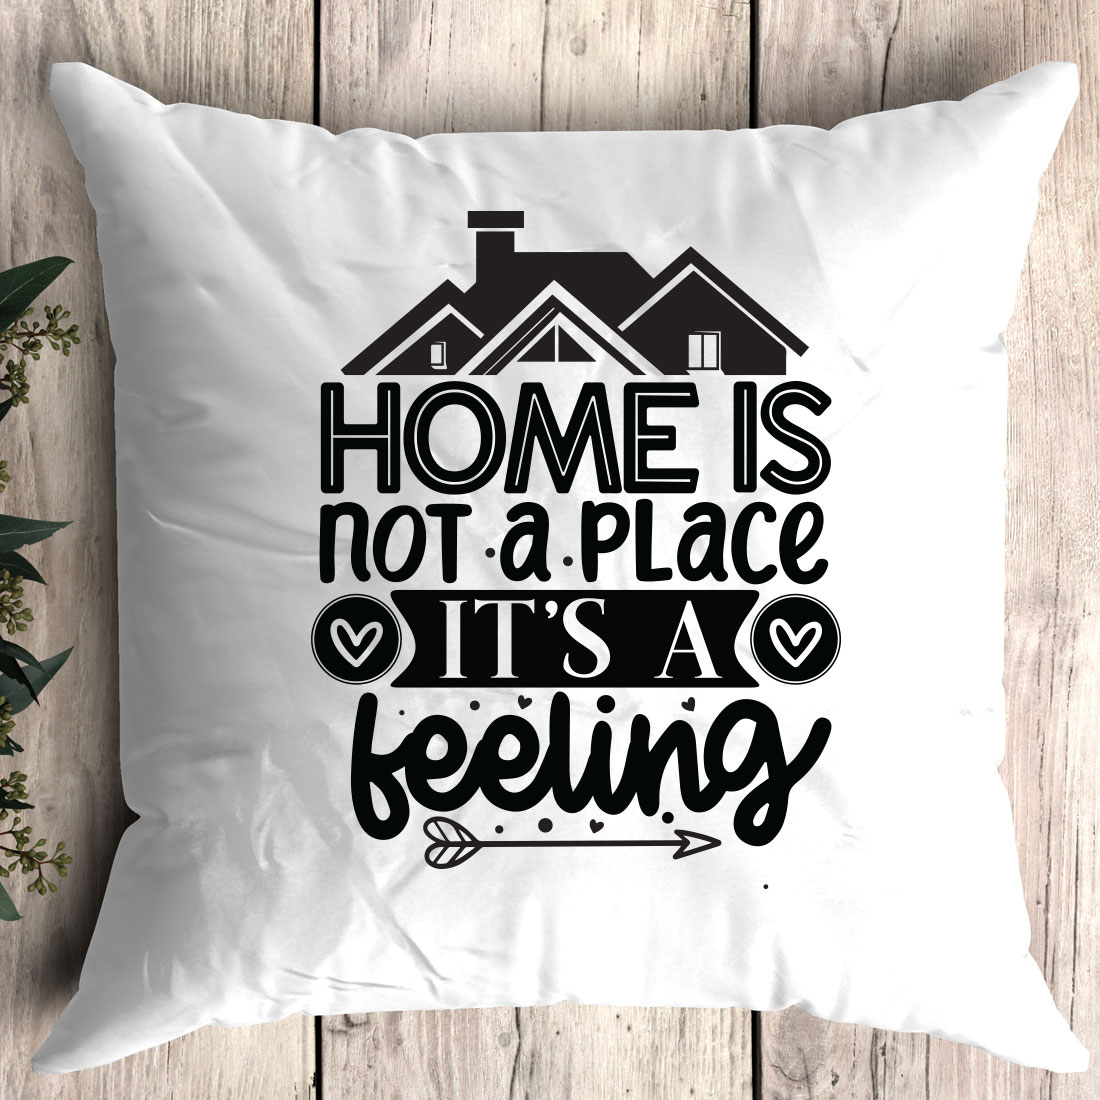 Pillow that says home is not a place it's a feeling.